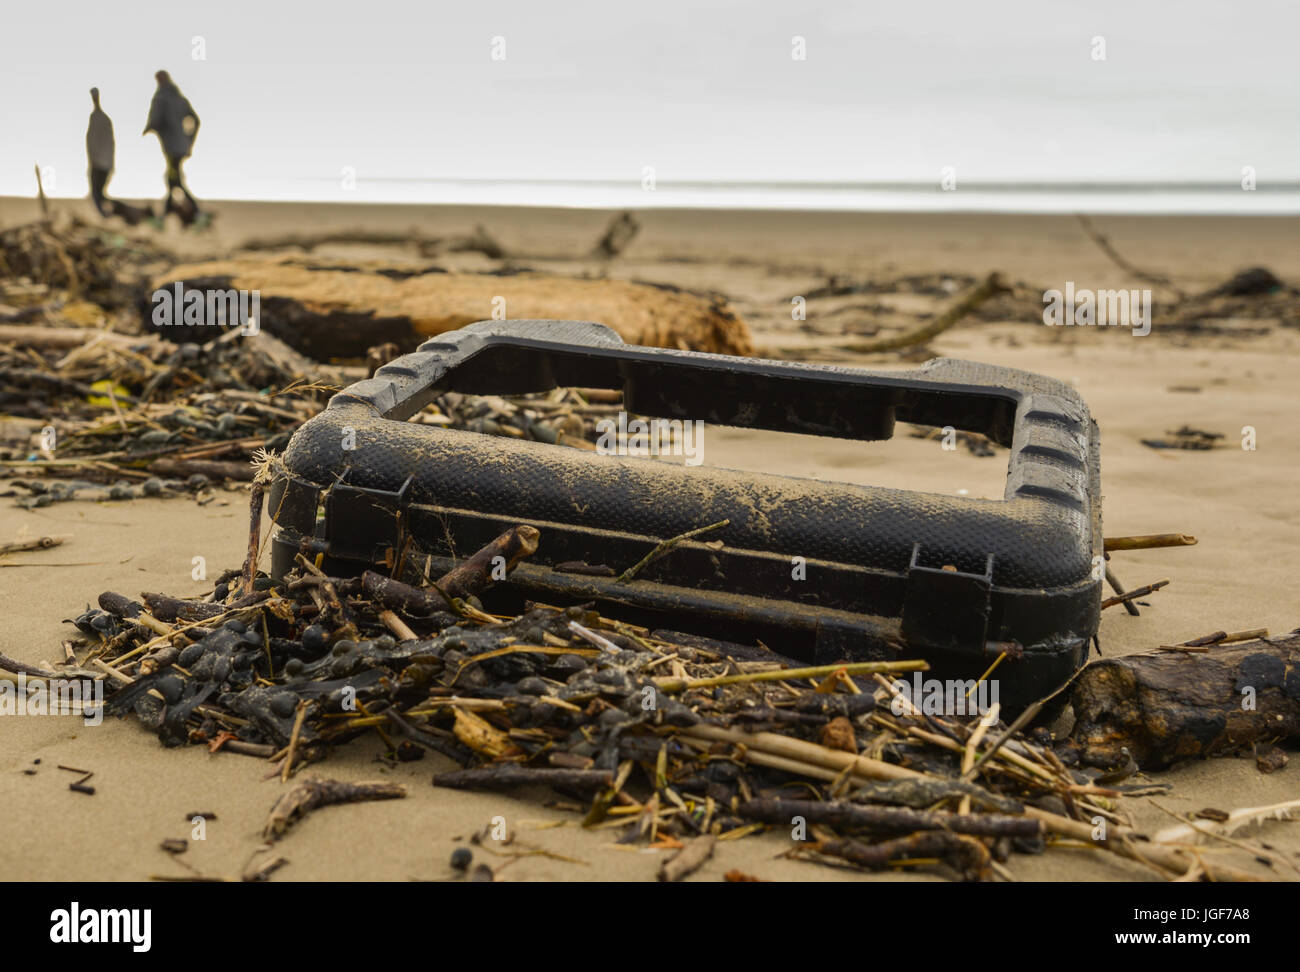 Debris and detritus left on Welsh beach following strong winds and severe weather conditions. UK. Stock Photo